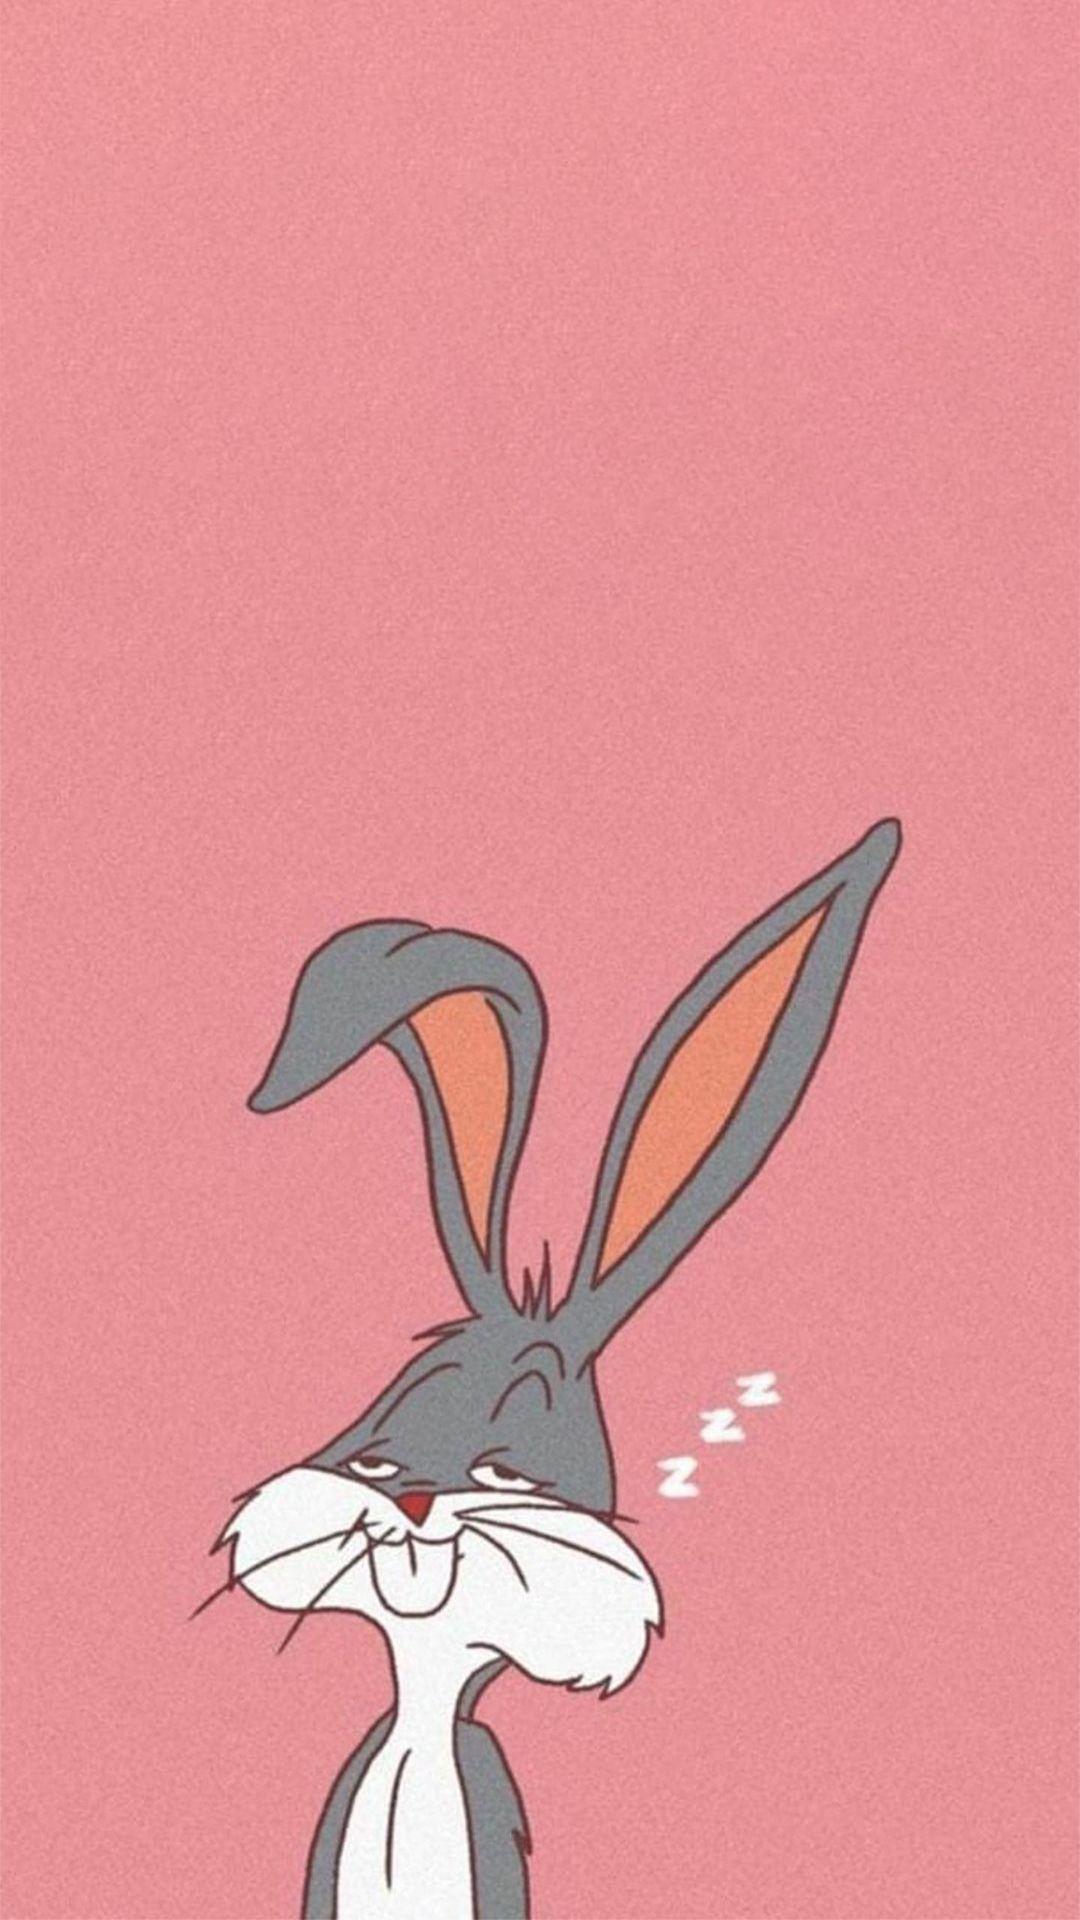 Looney Tunes Wallpapers on Tumblr